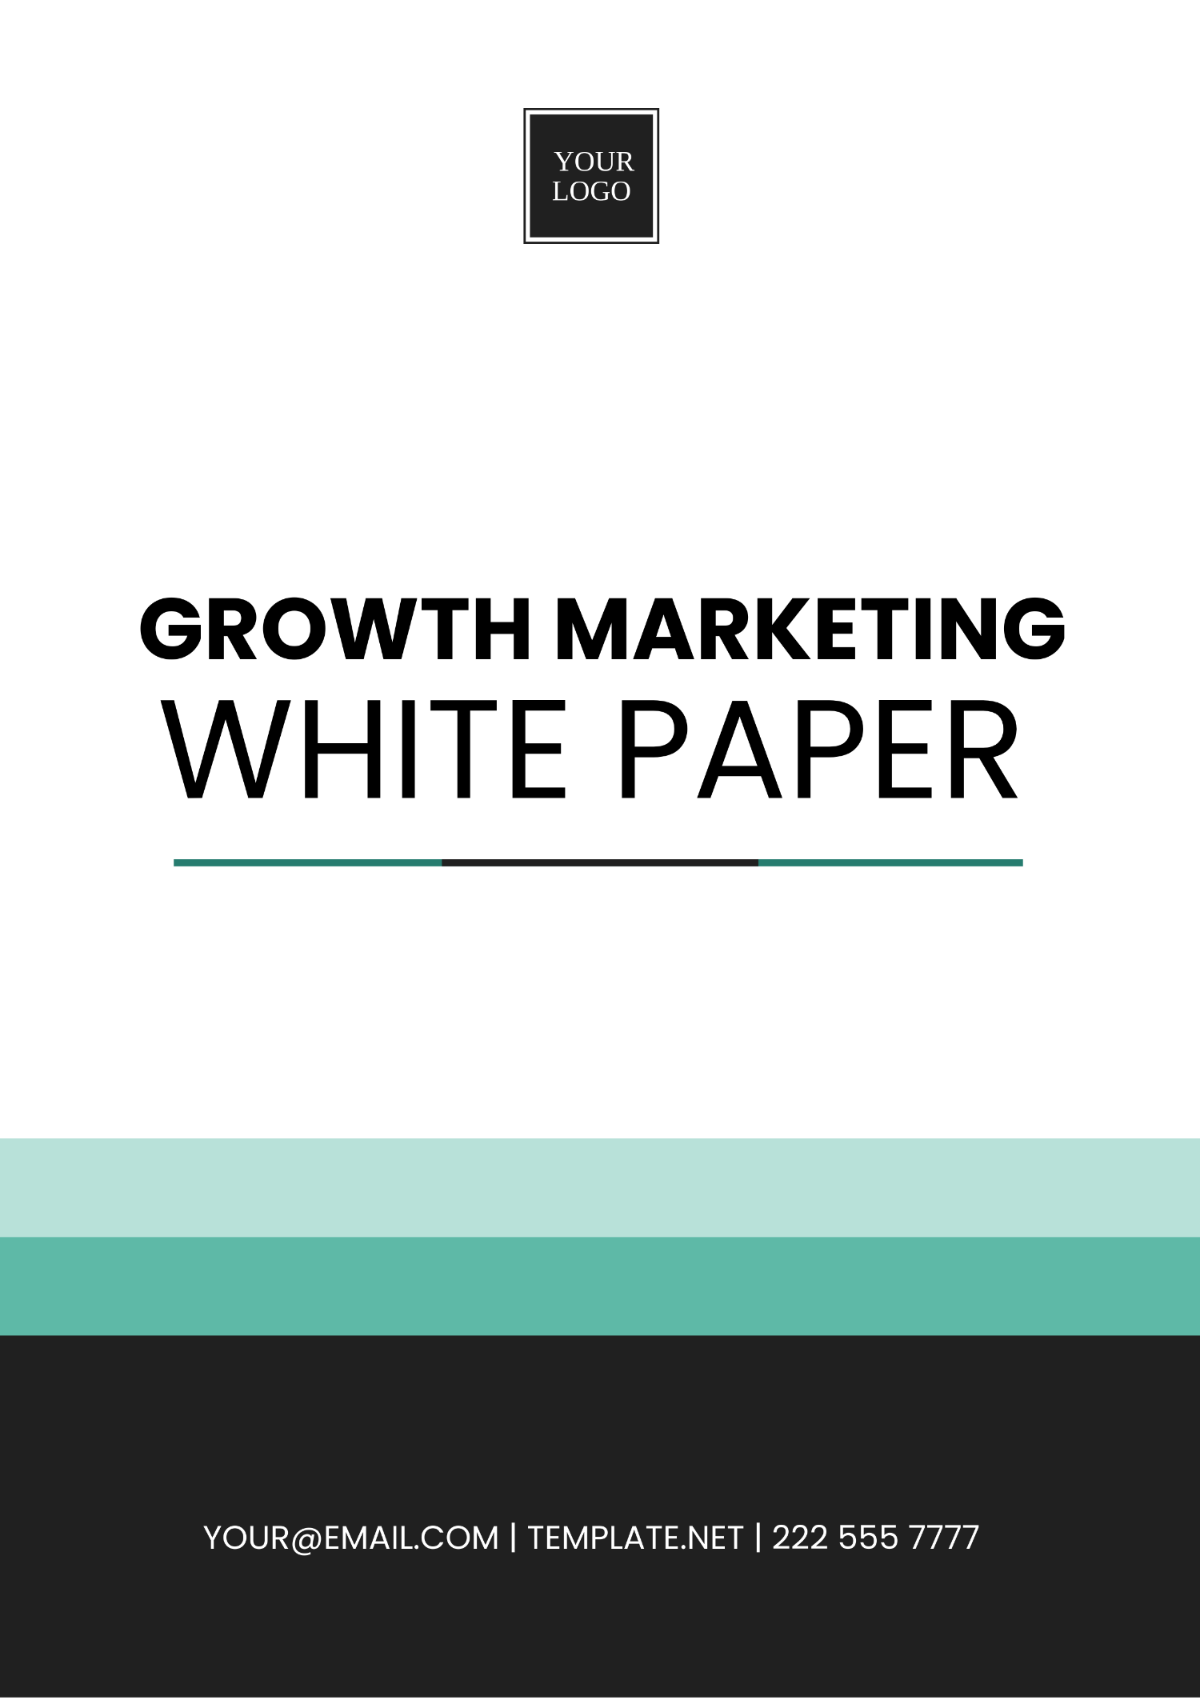 Growth Marketing White Paper Template